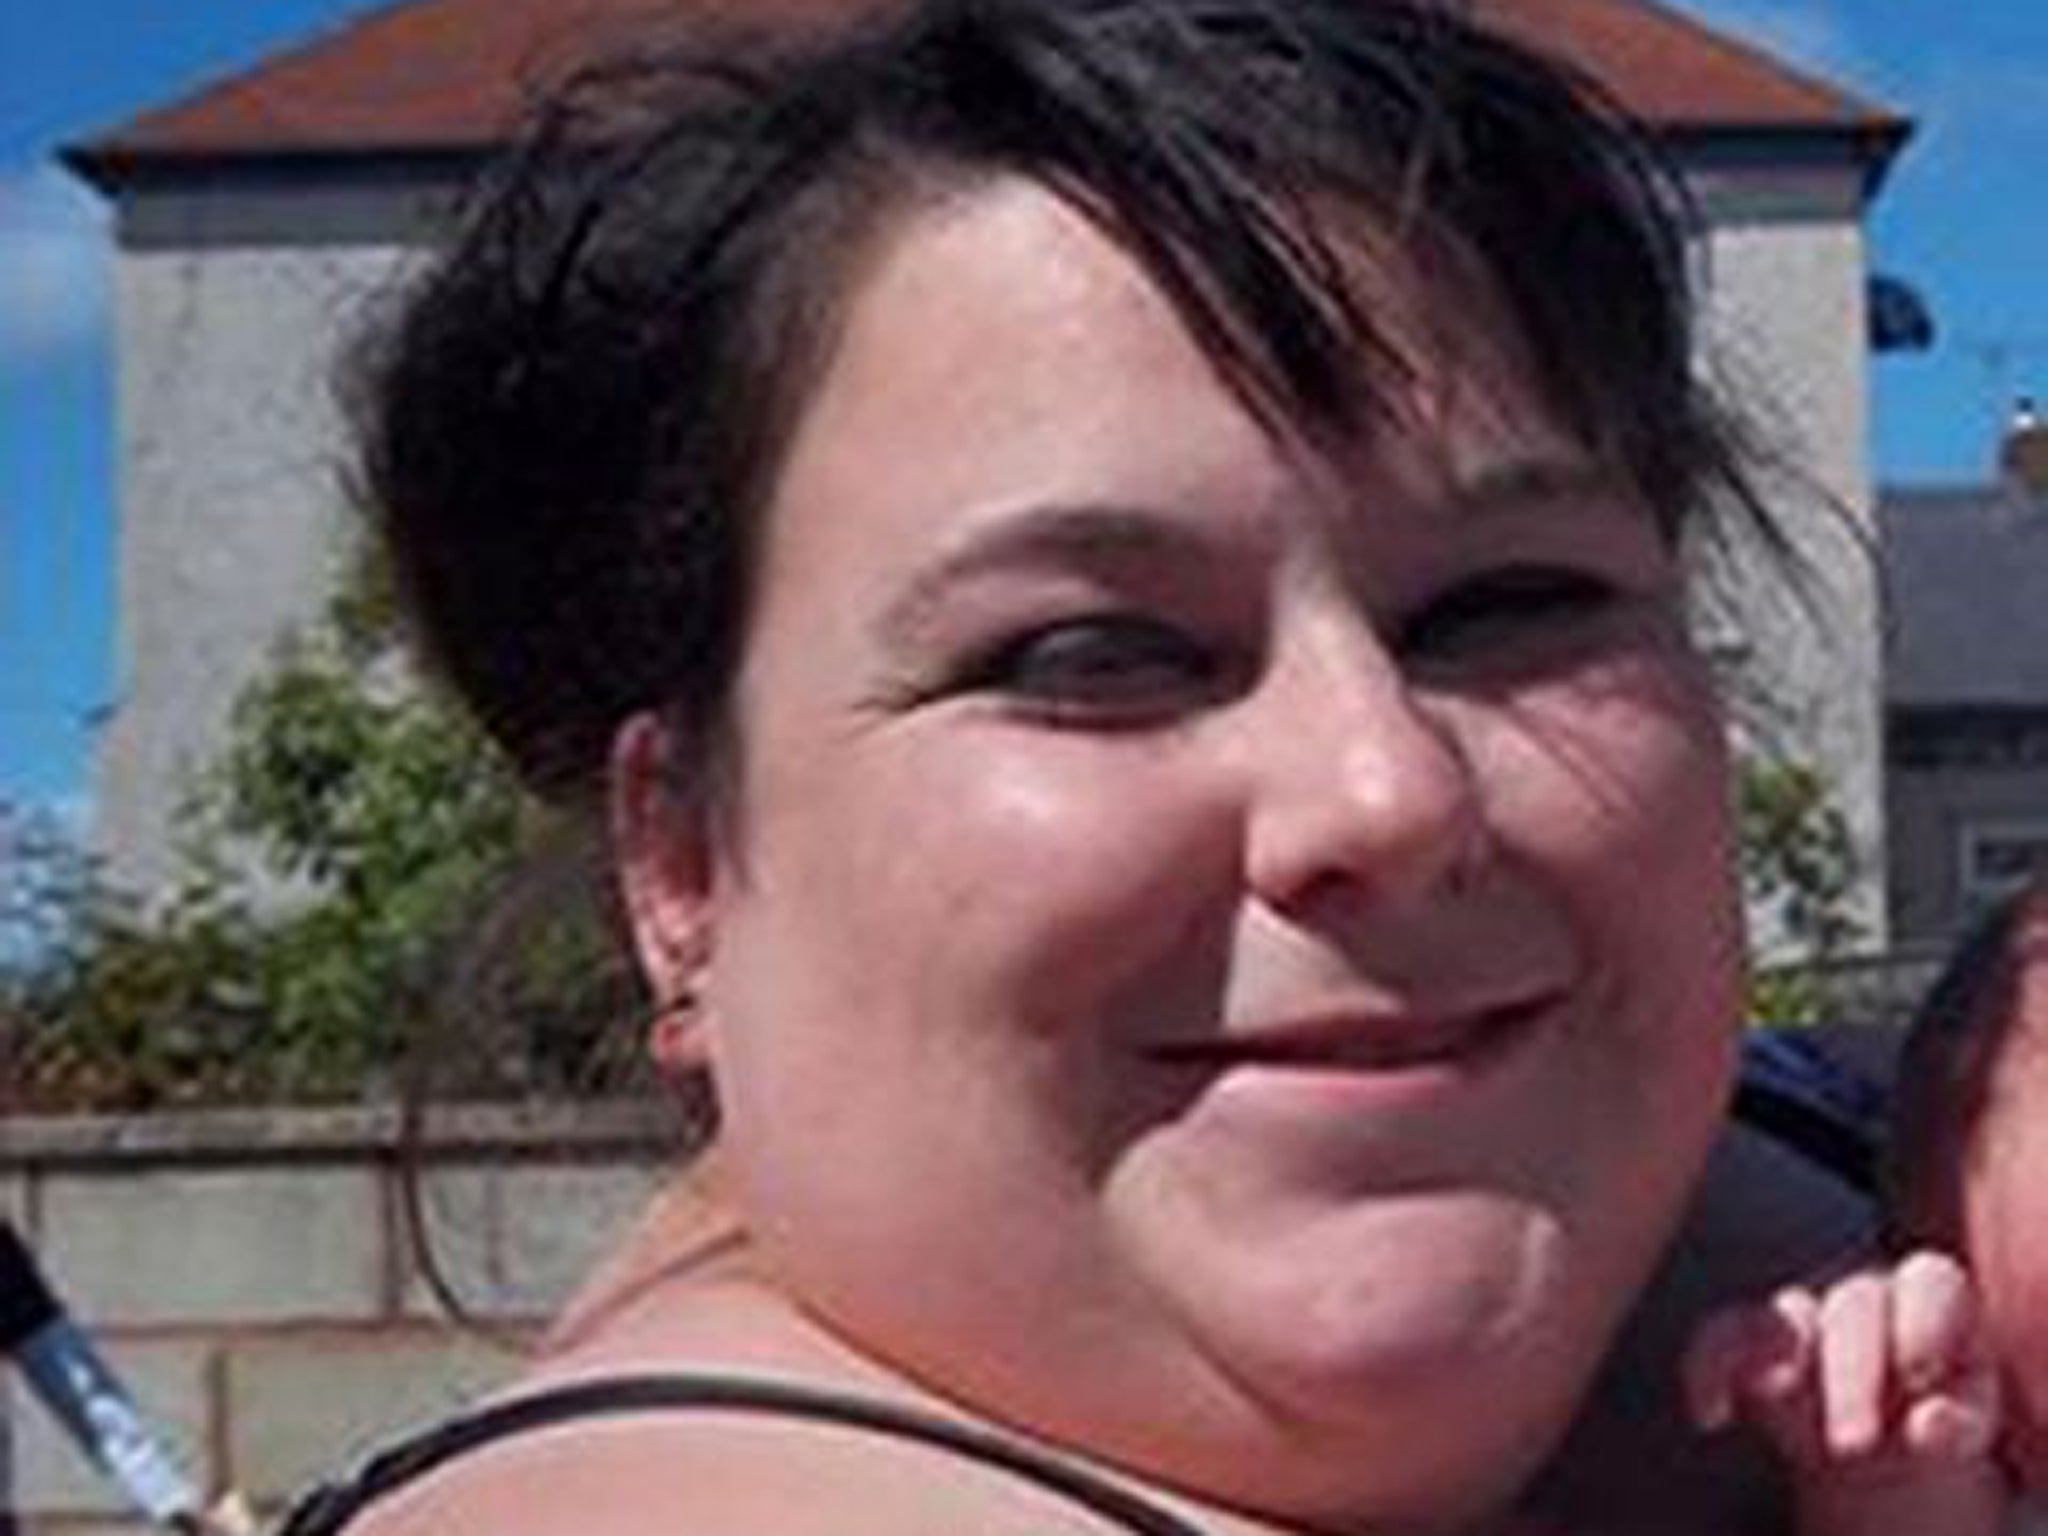 Lee-Anna Shiers, 20, who was one of the five victims killed in a house fire in Prestatyn, North Wales